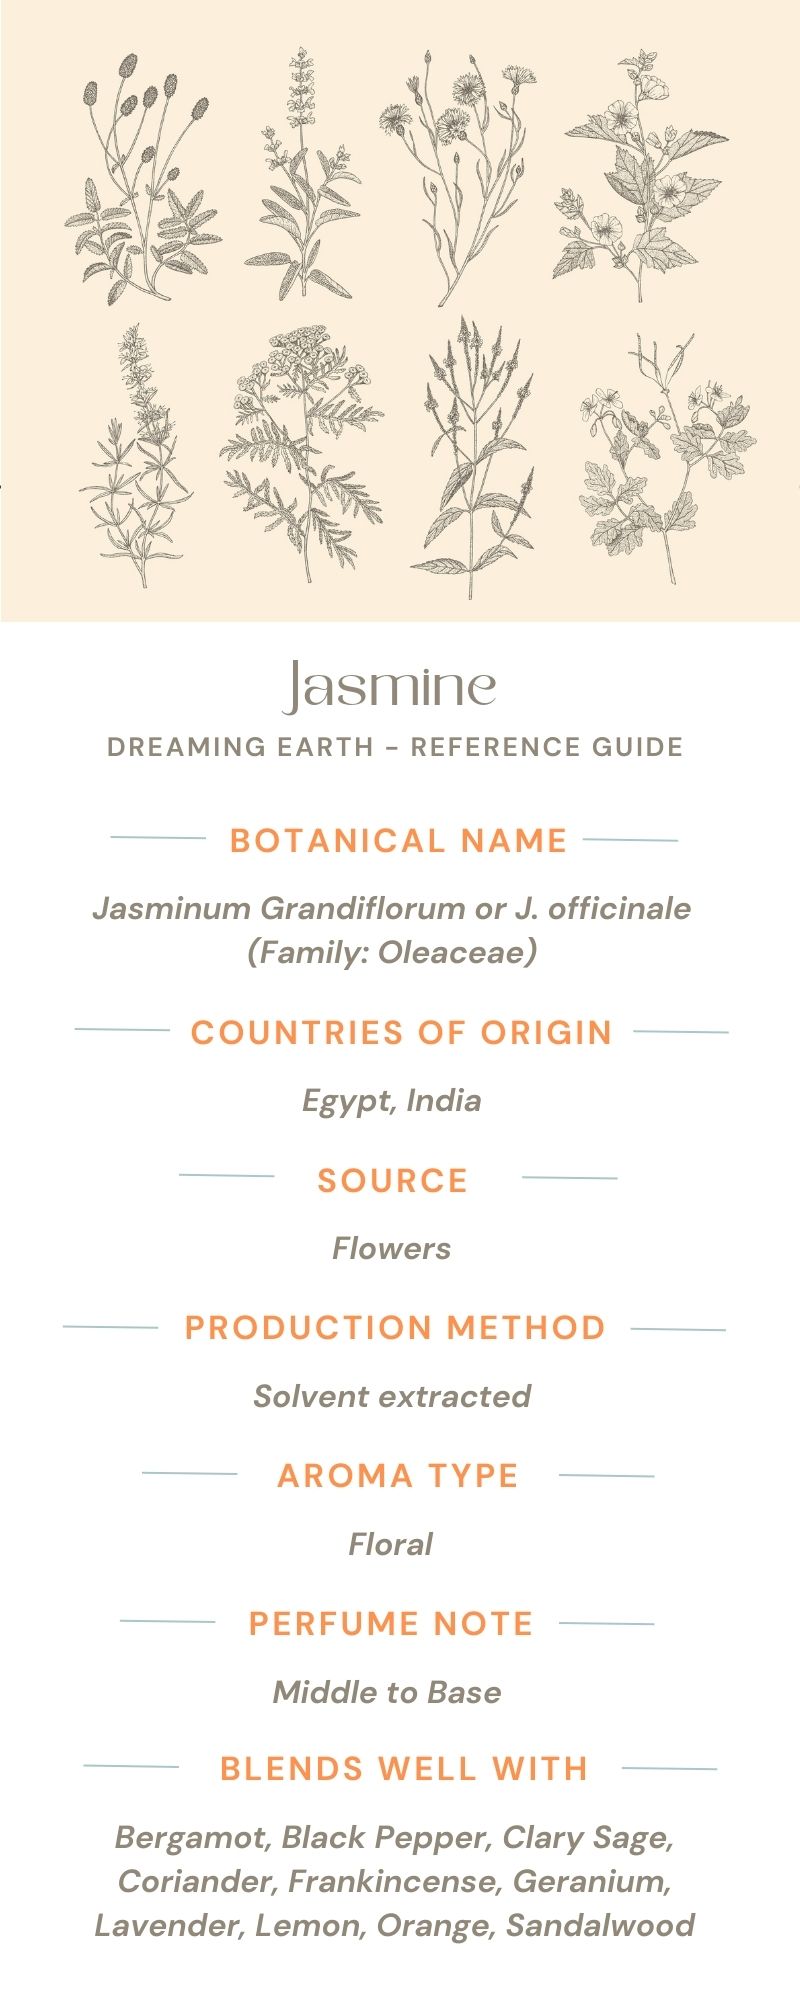 Load image into Gallery viewer, Jasmine Absolute - Dreaming Earth Inc
